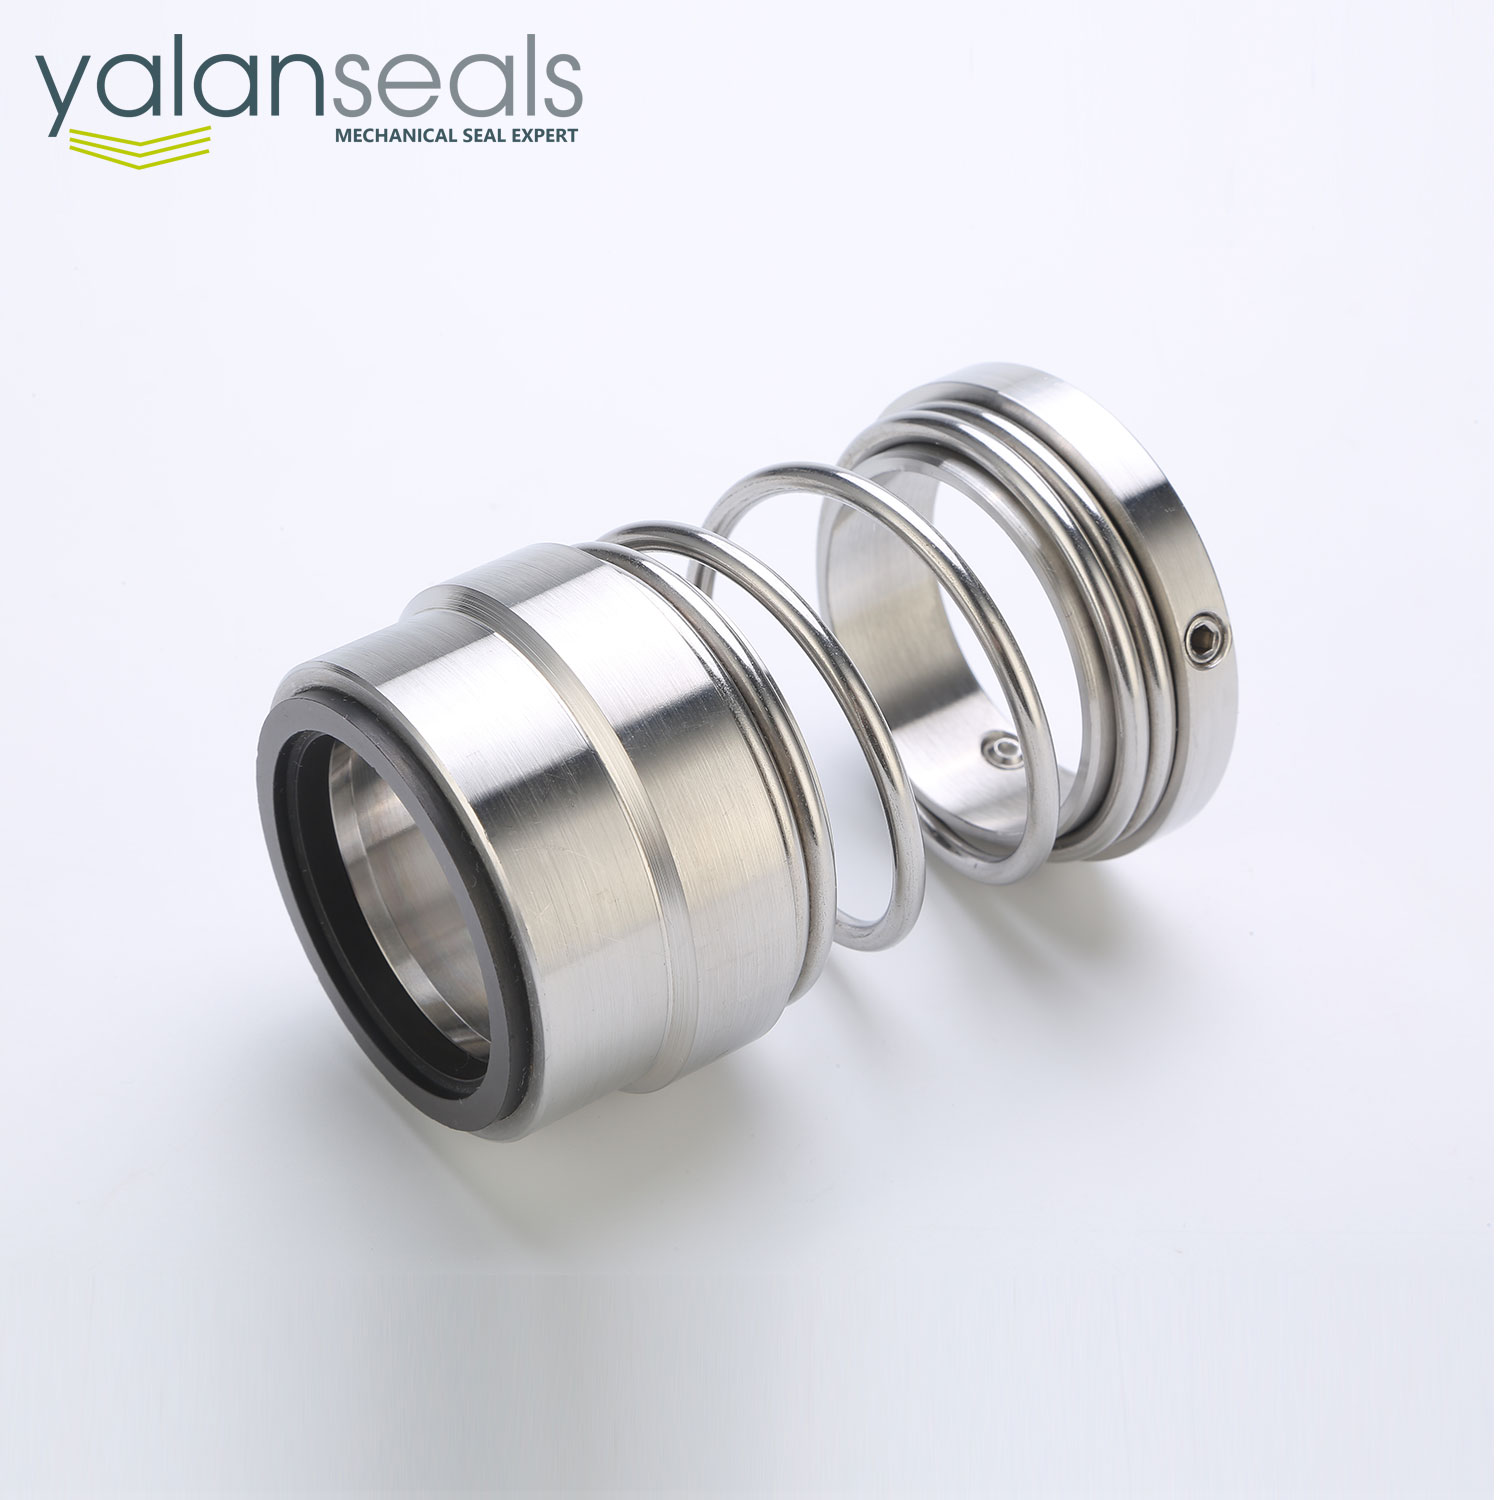 YALAN Type 1523 Mechanical Seals for Industrial Pumps